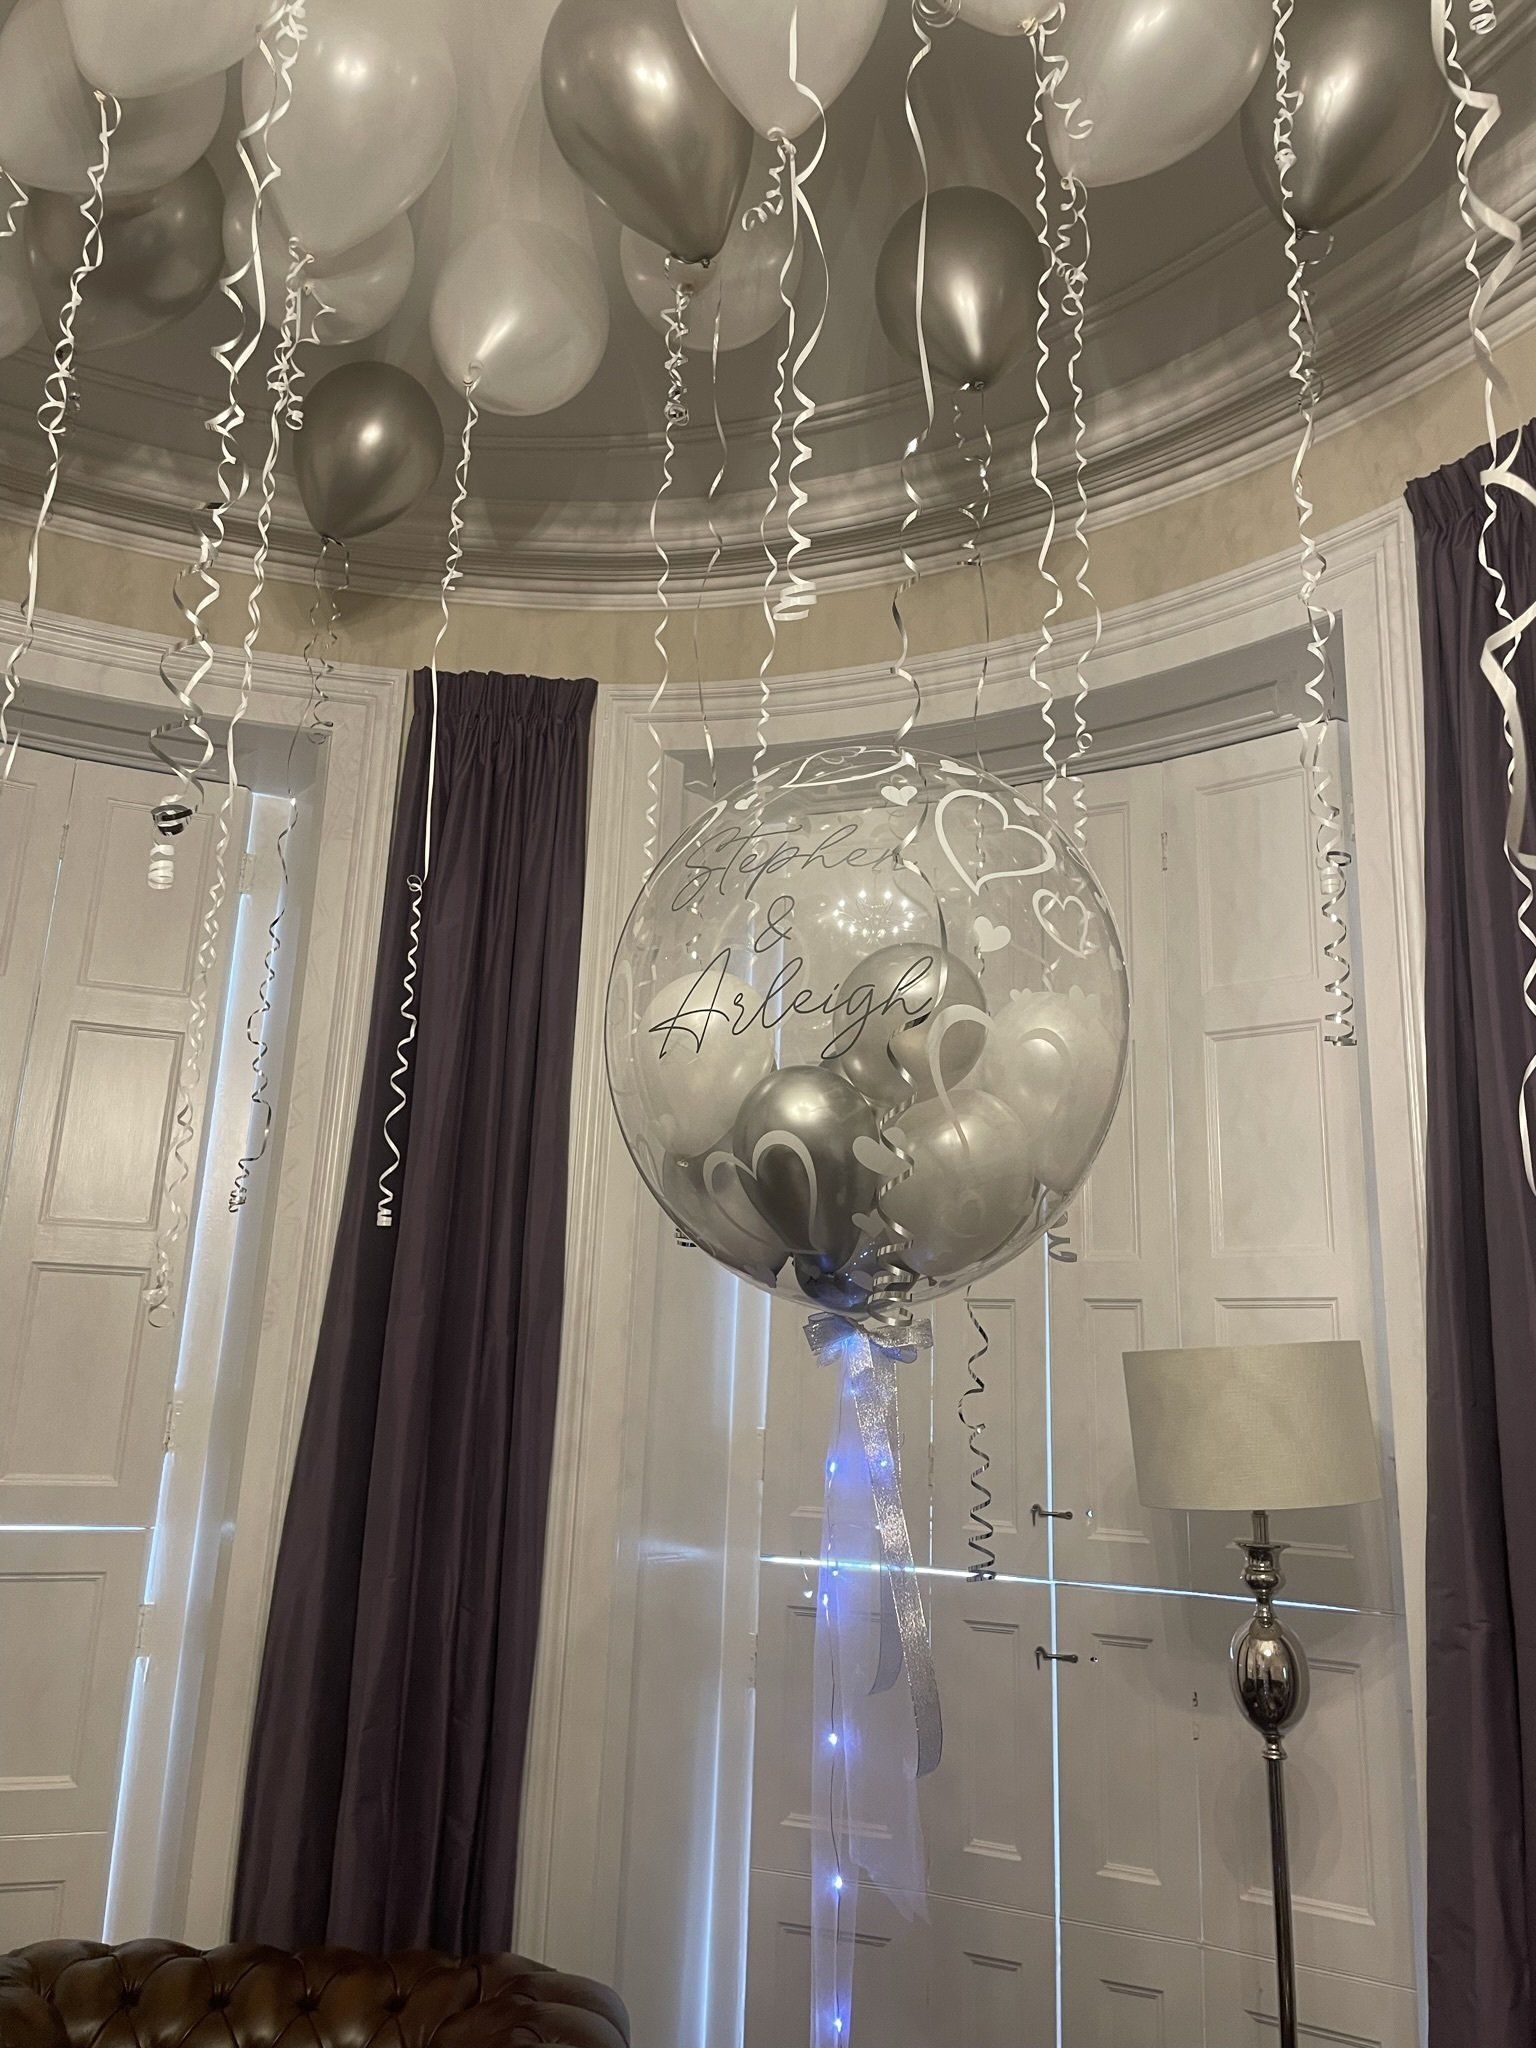 Personalised bubble and ceiling balloons